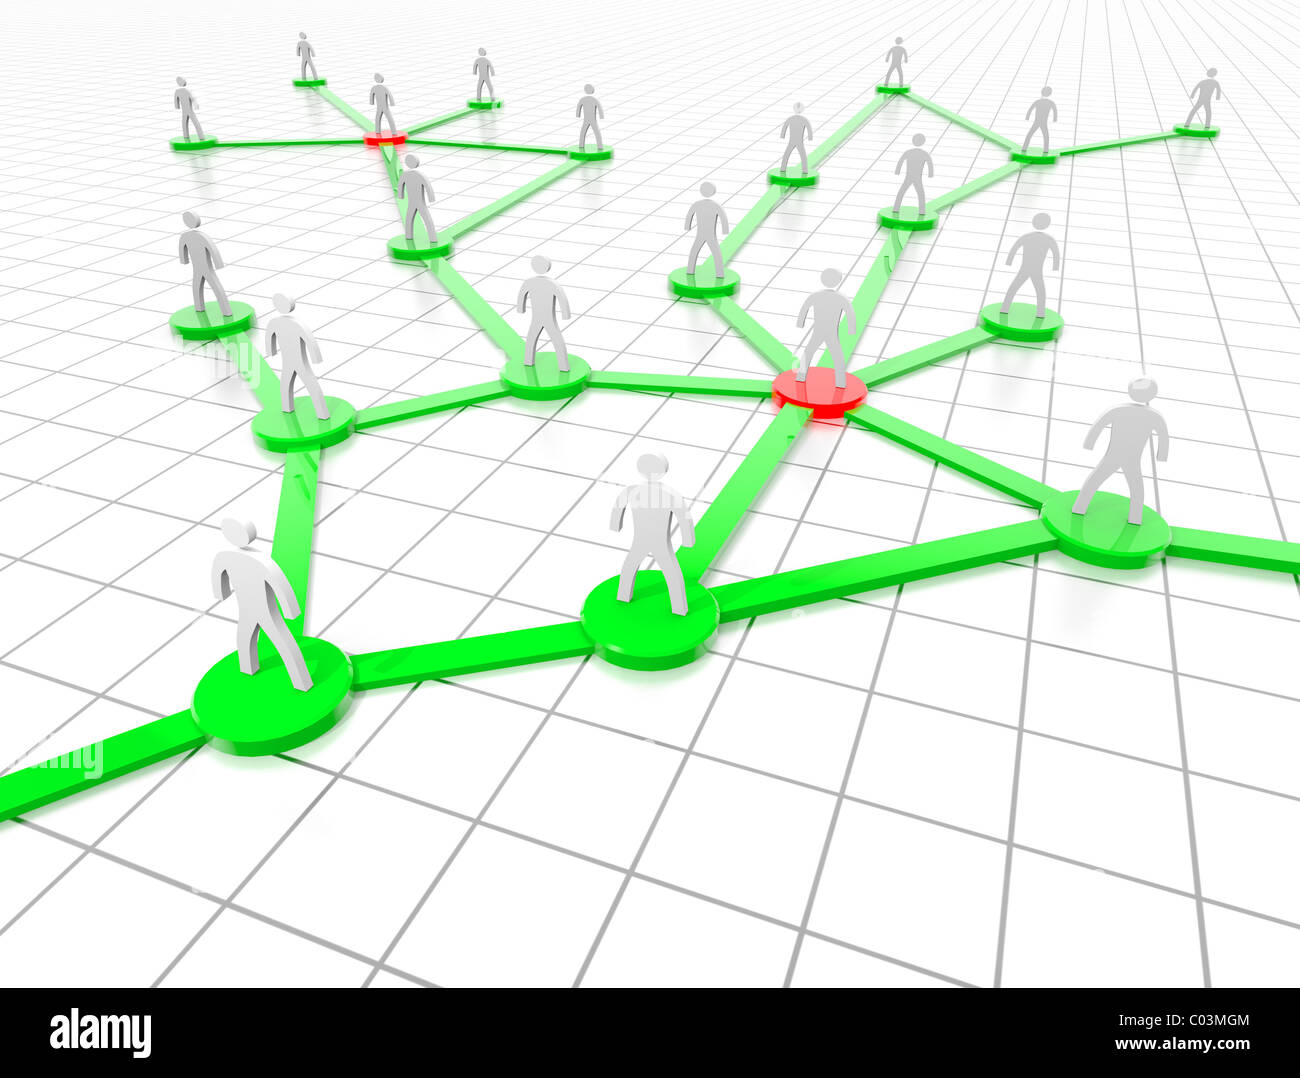 Social Network stylized People on a green Network Stock Photo